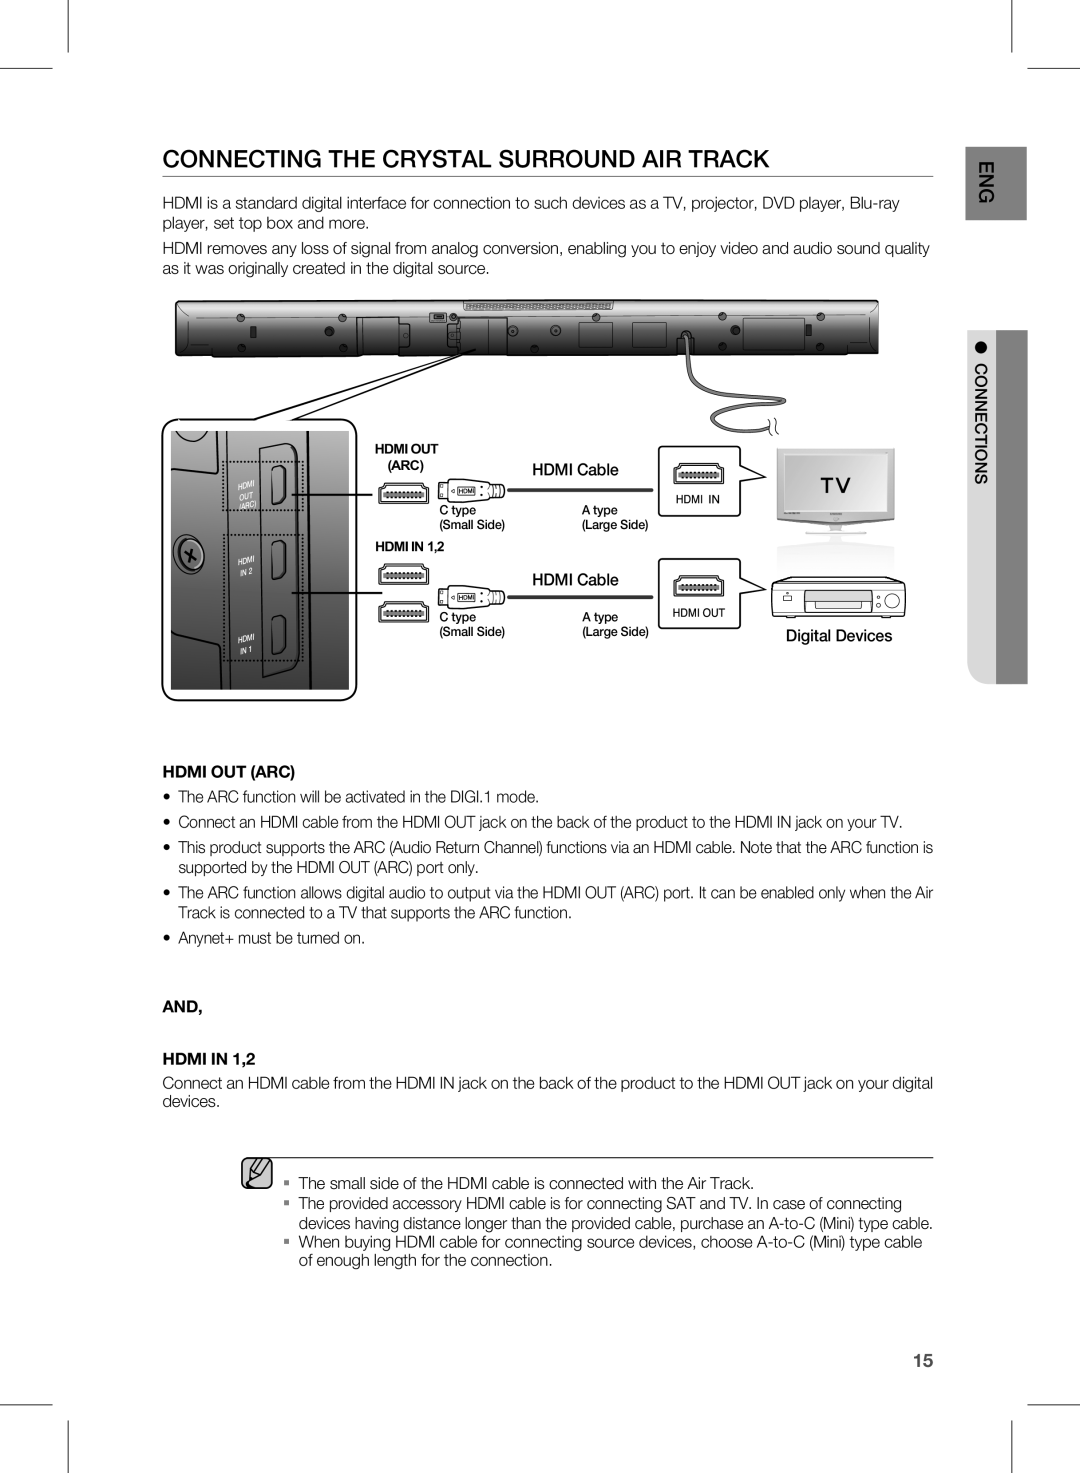 Samsung HW-D550, HW-D551 user manual connecting the CRYSTAL SURROUND AIR TRACK, Hdmi Out Arc, AND HDMI IN 1,2 